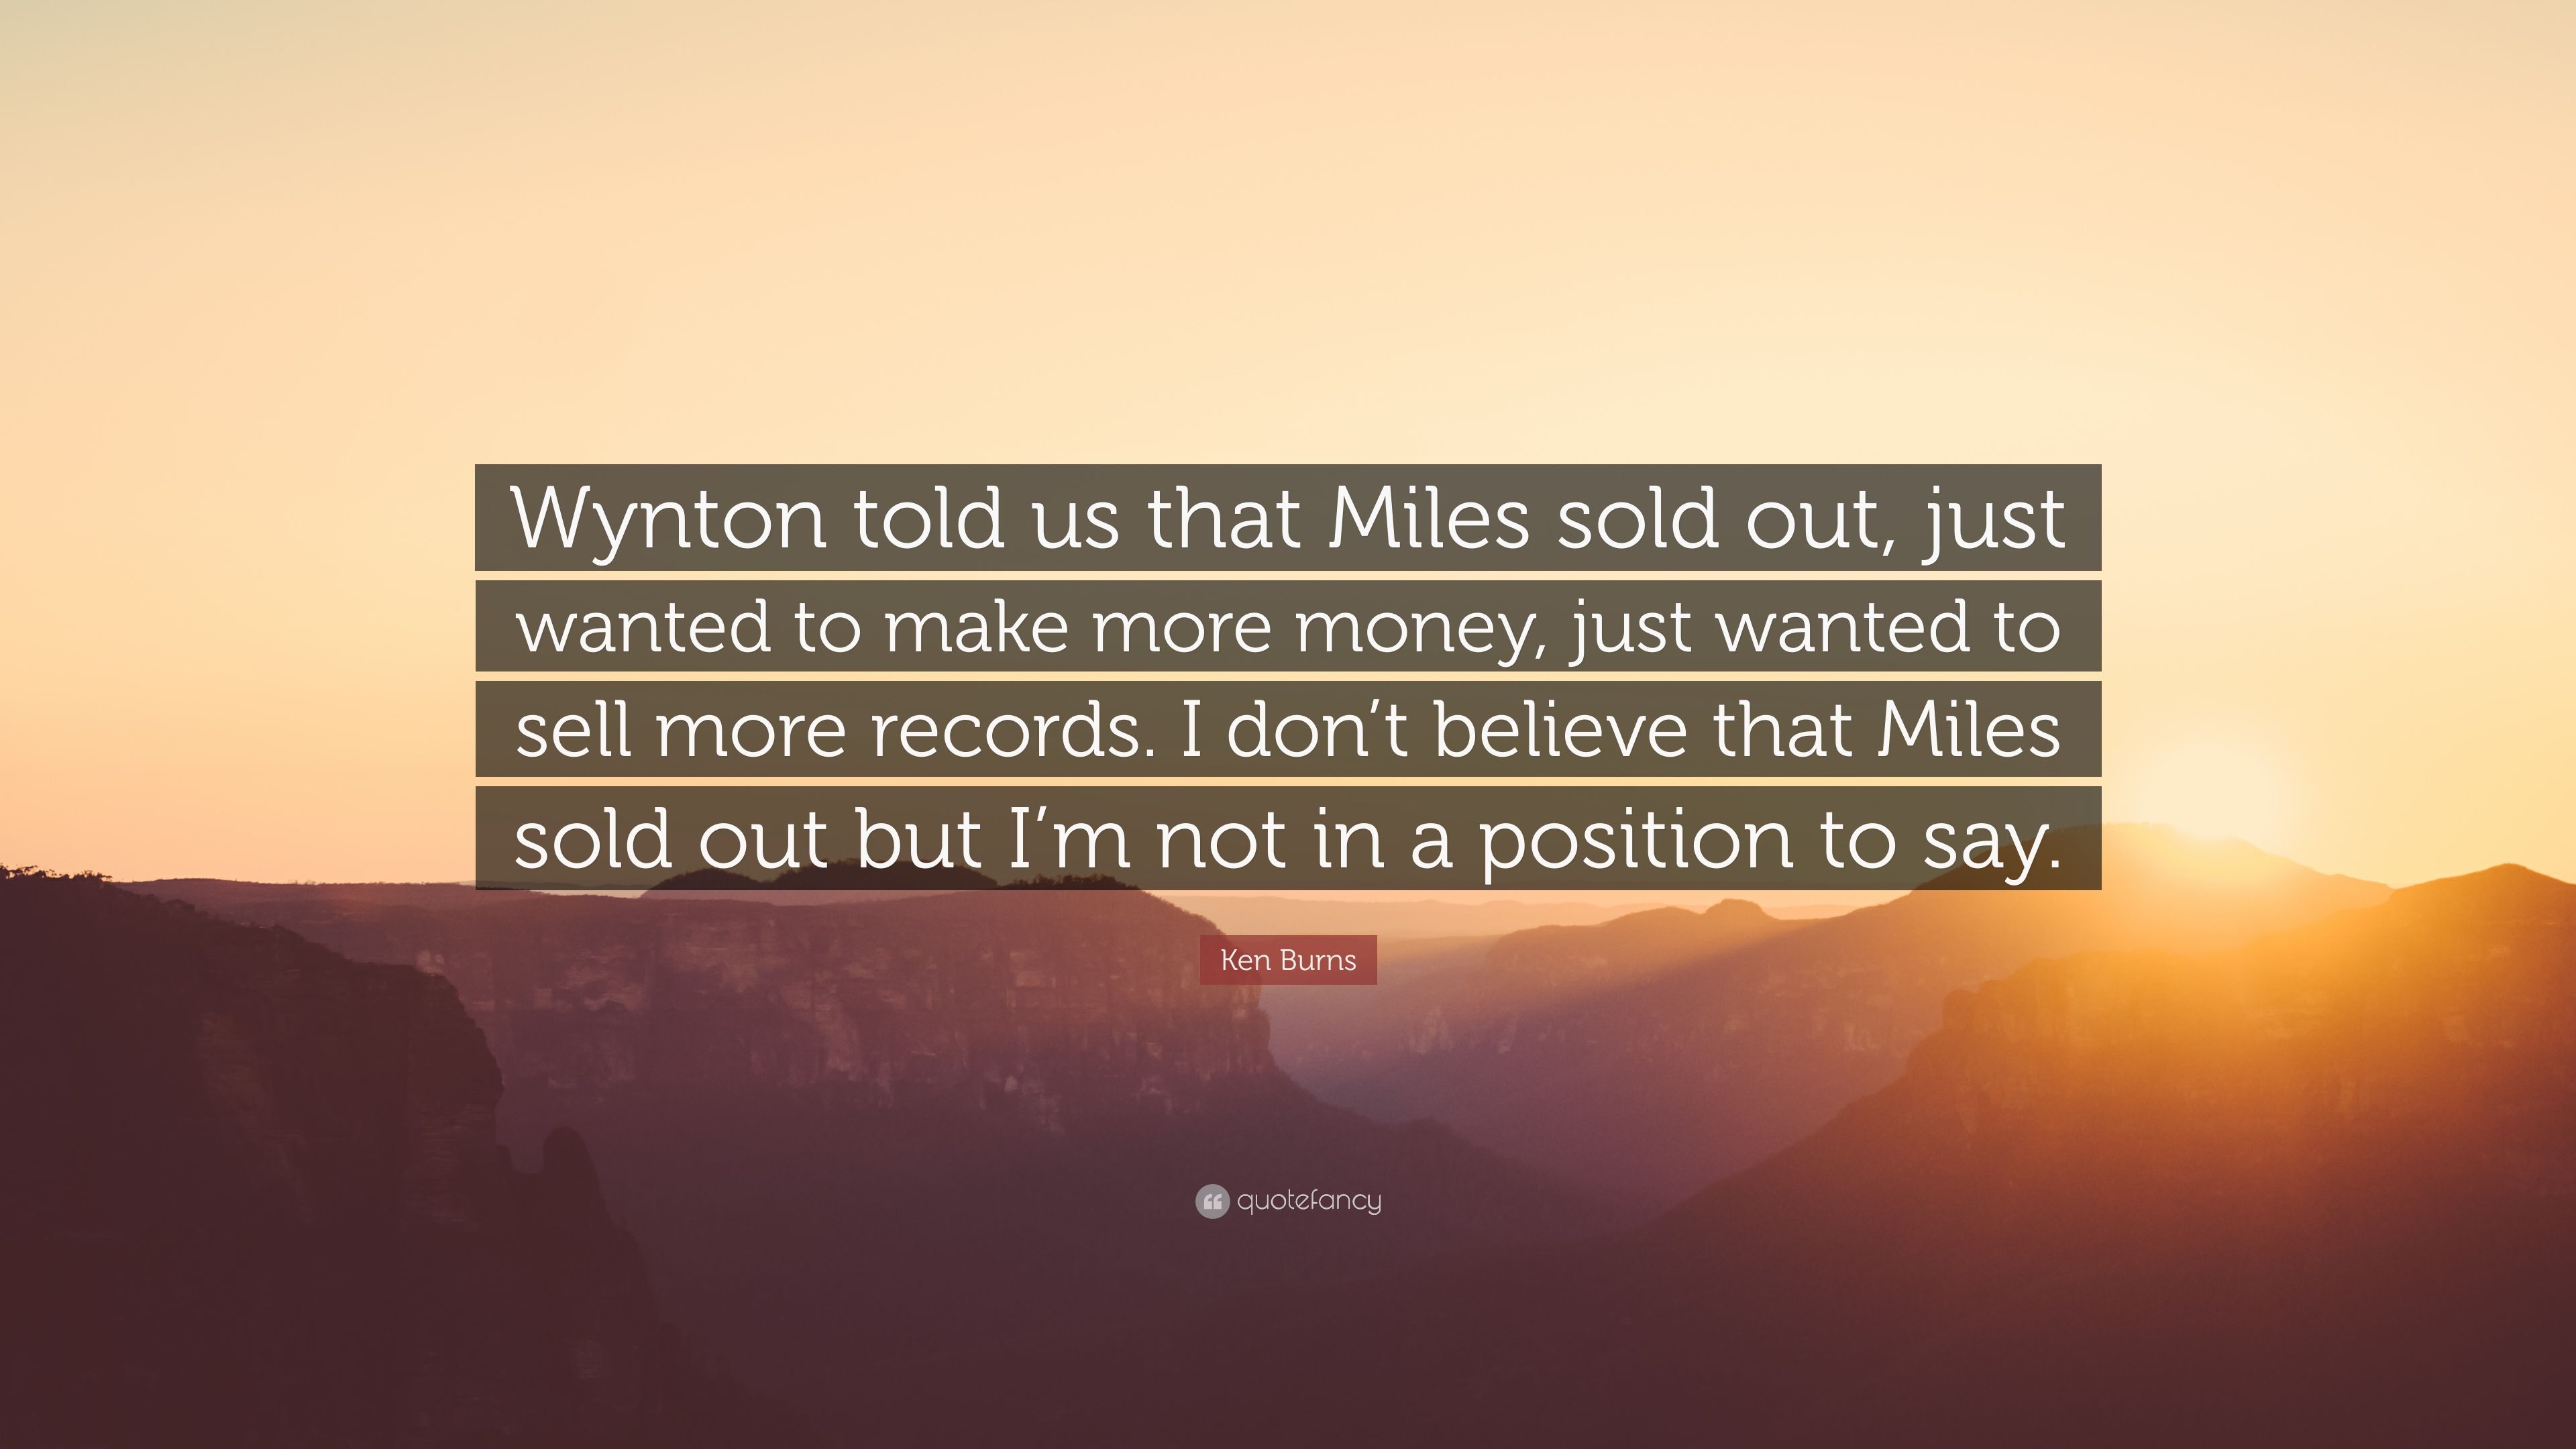 Ken Burns Quote: “Wynton told us that Miles sold out, just wanted